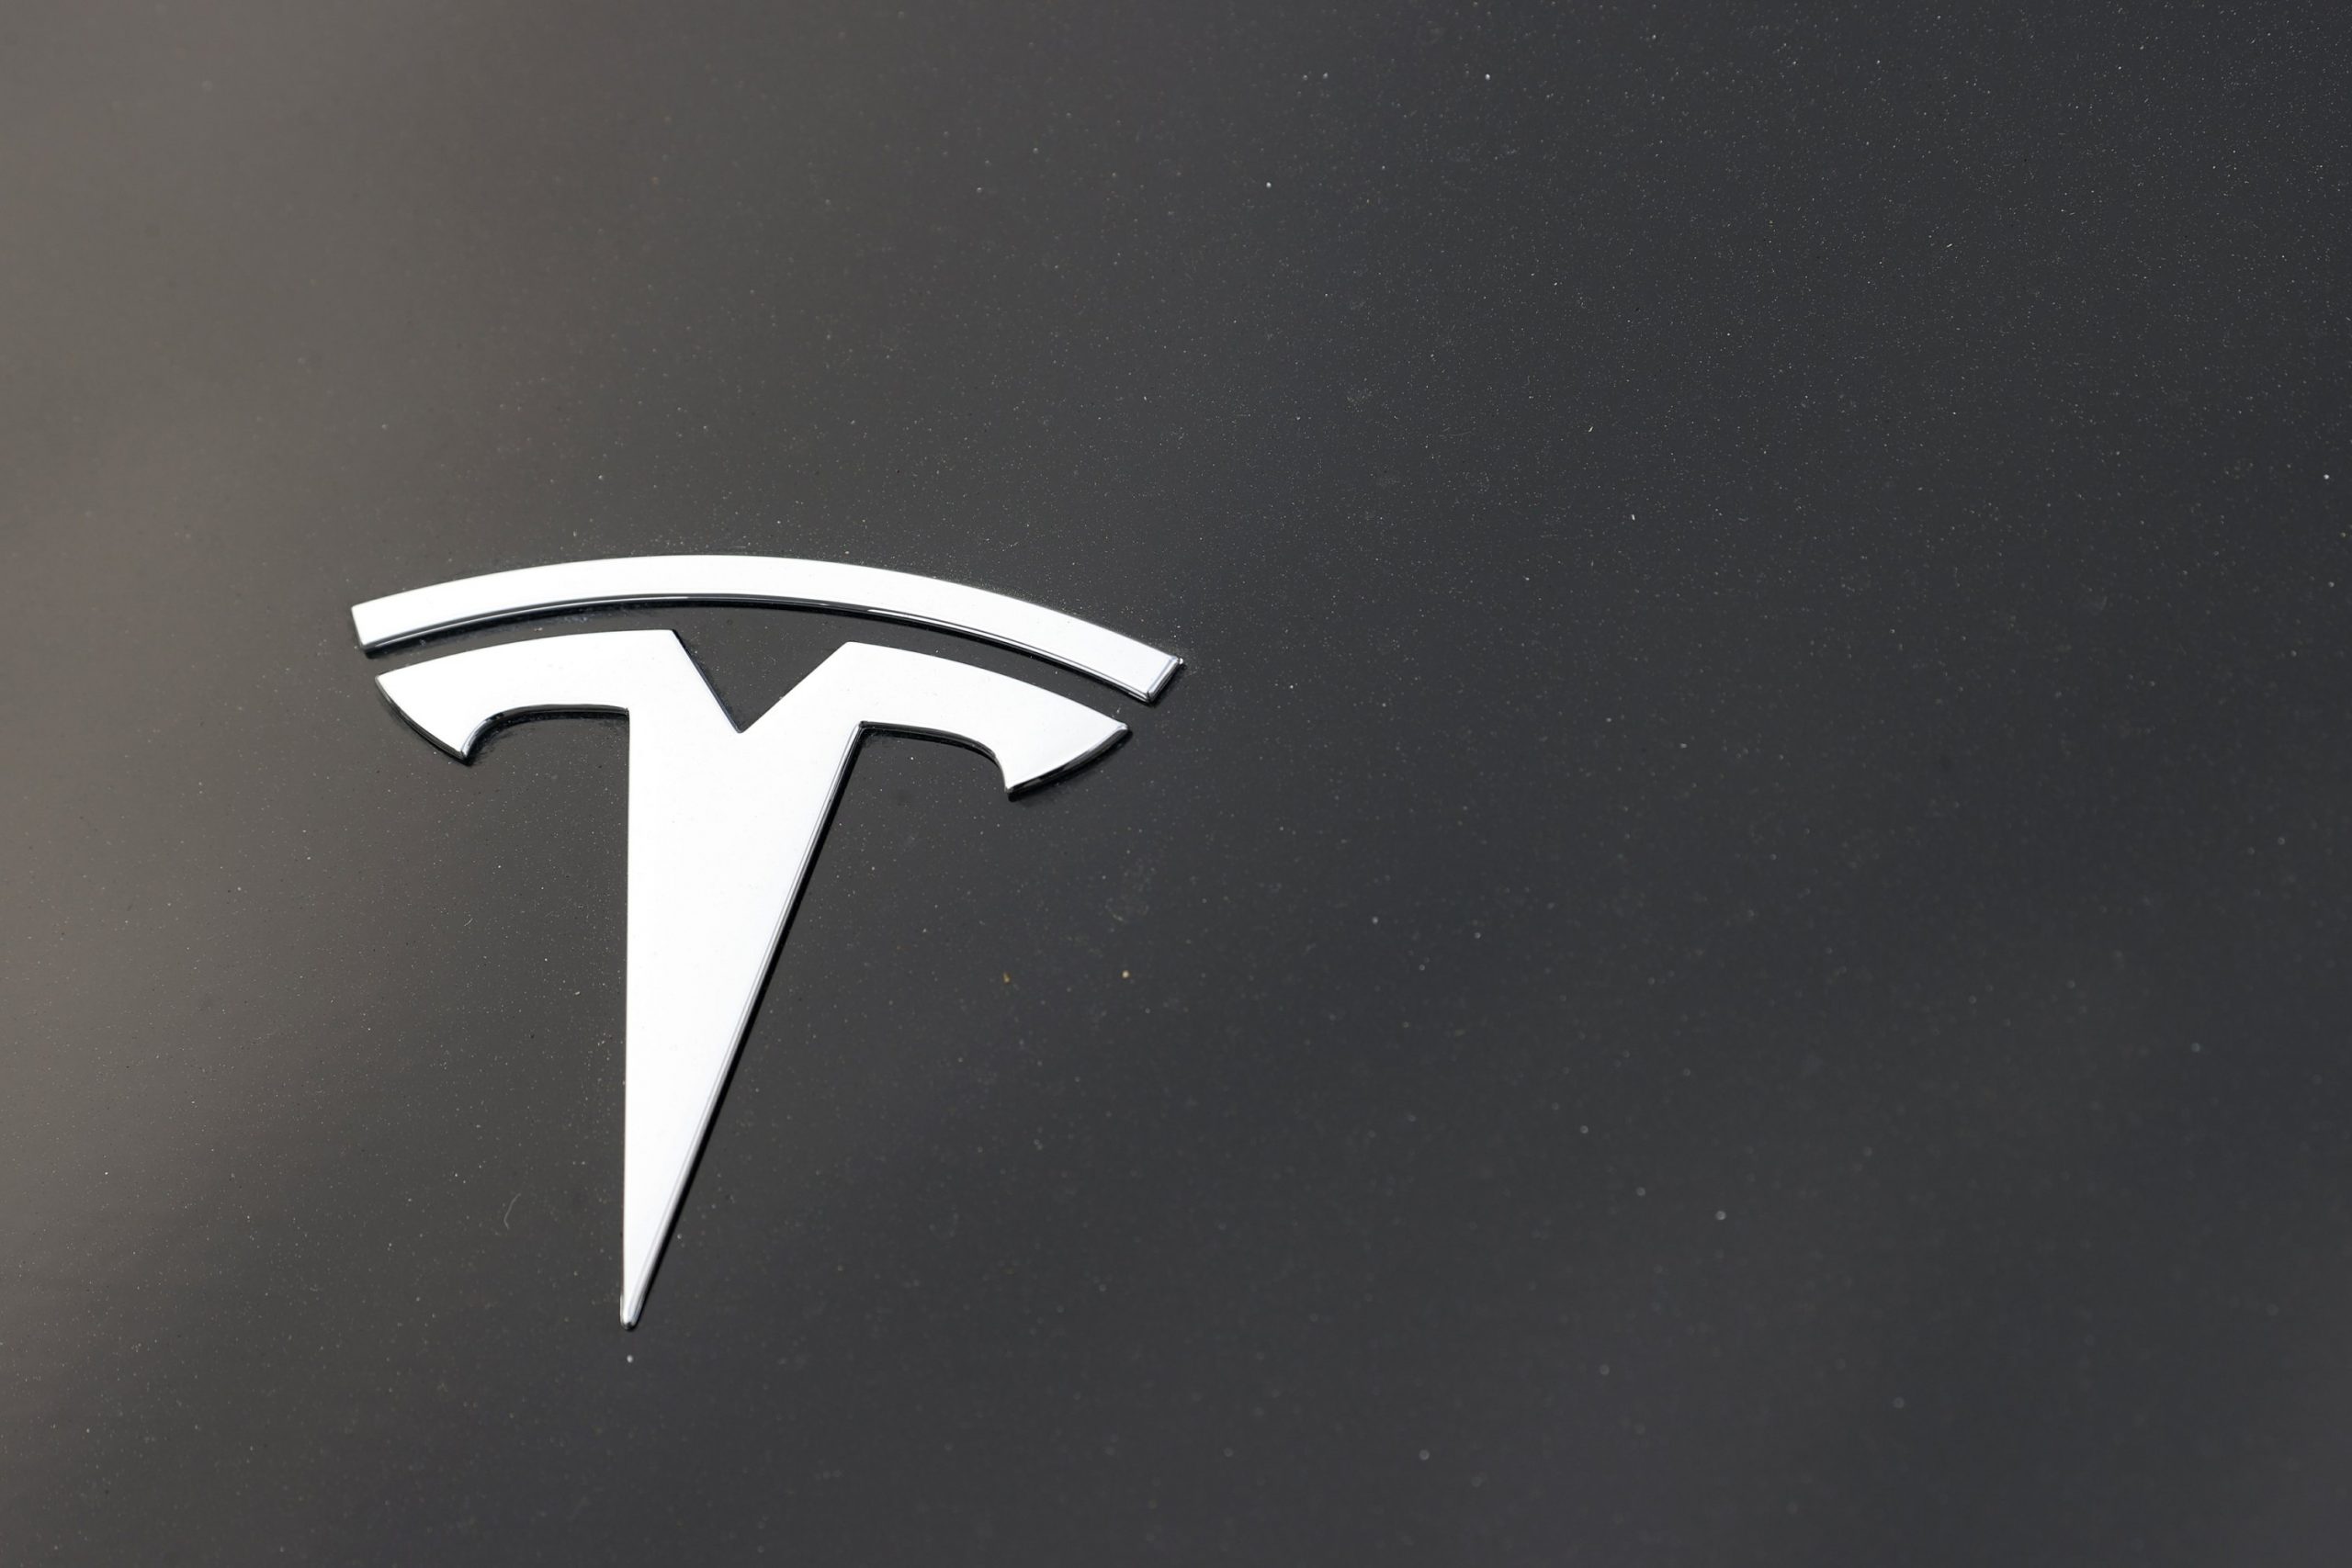 Highway safety agency to investigate crash involving TESLA that drove beneath semitrailer…